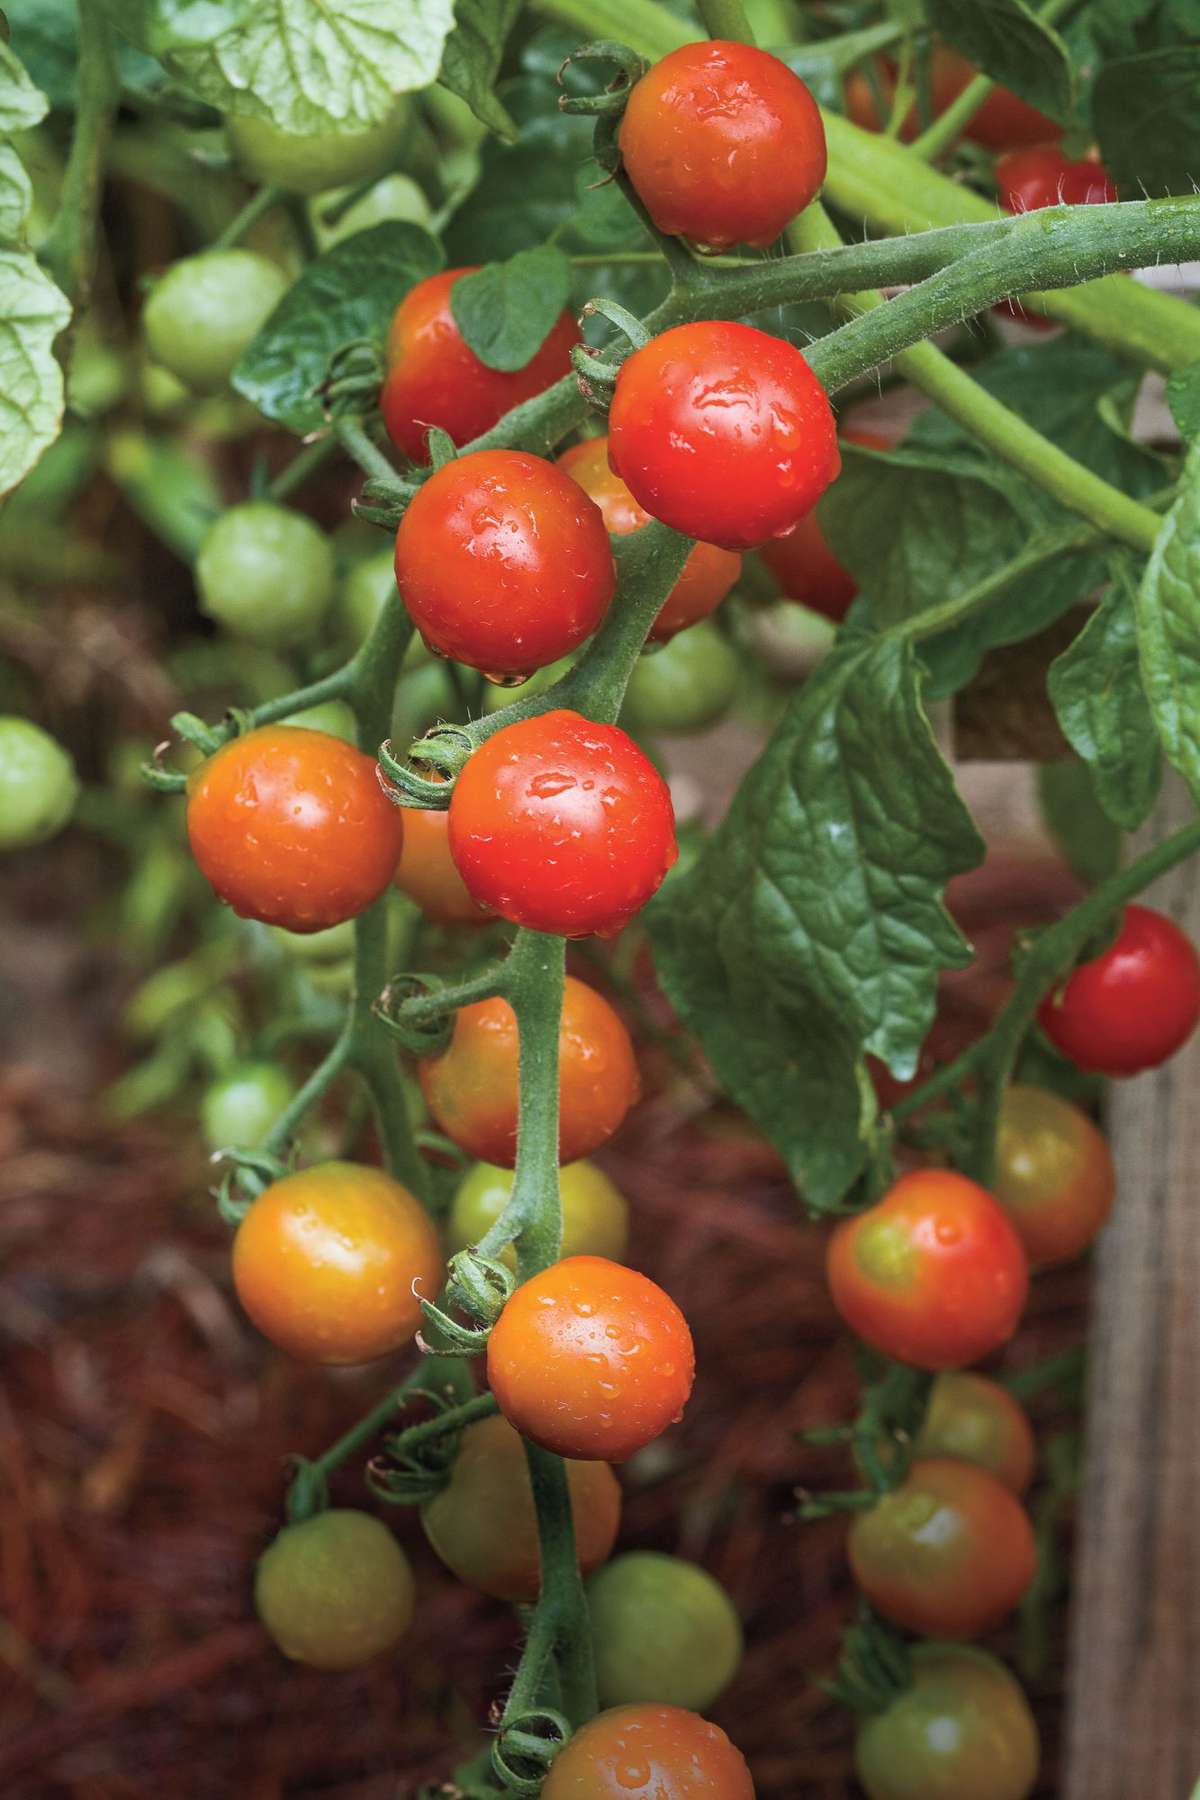 Try These Tomatoes